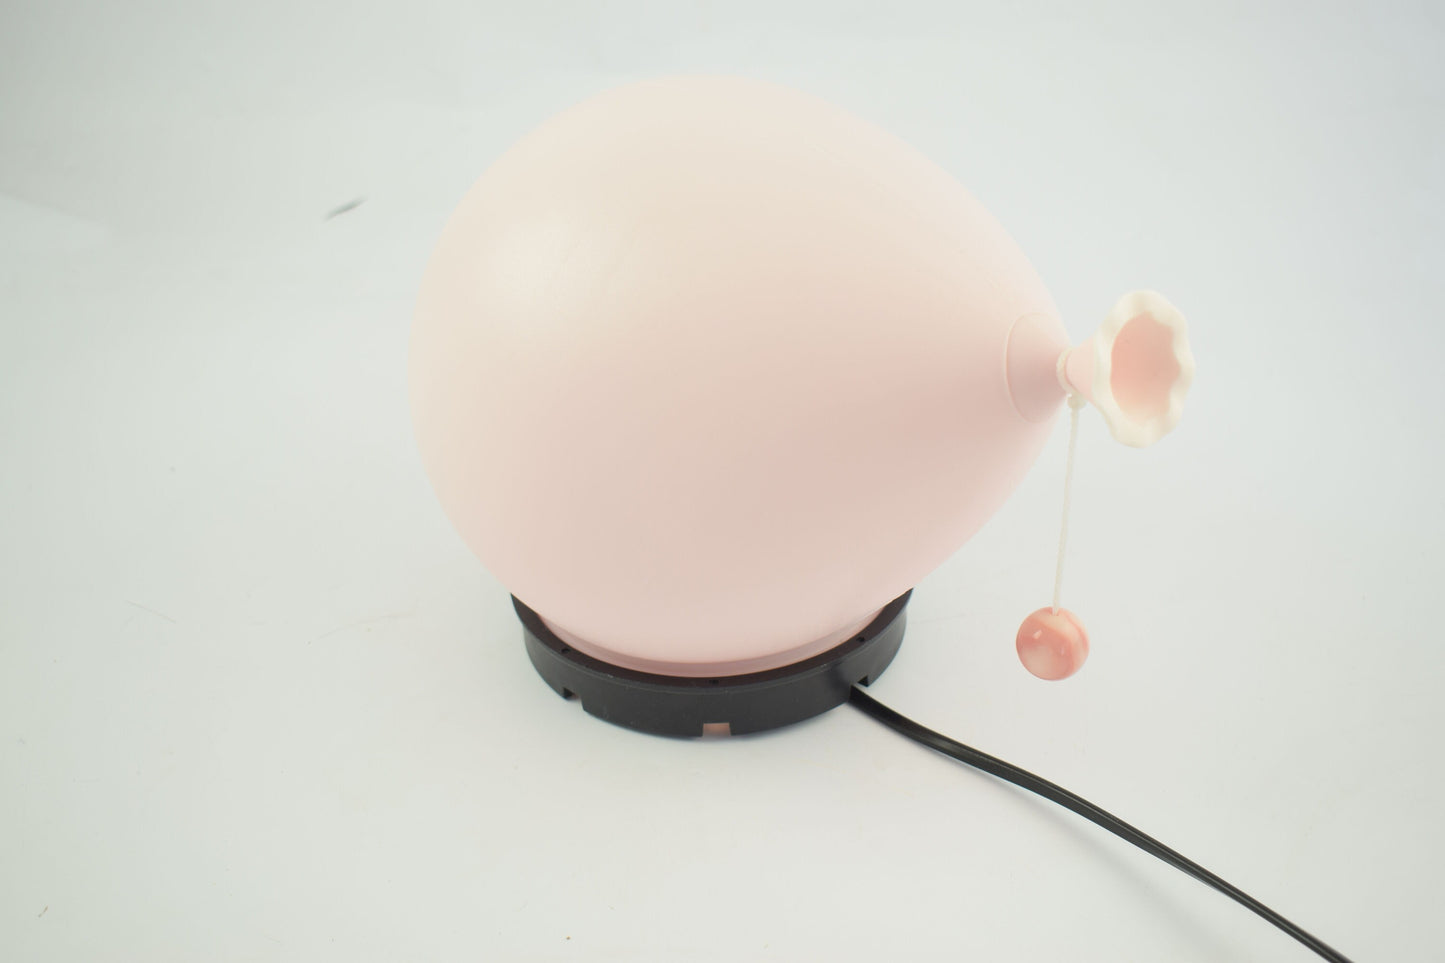 Table, wall or ceiling pink balloon lamp designed by Yves Christin, smallest version